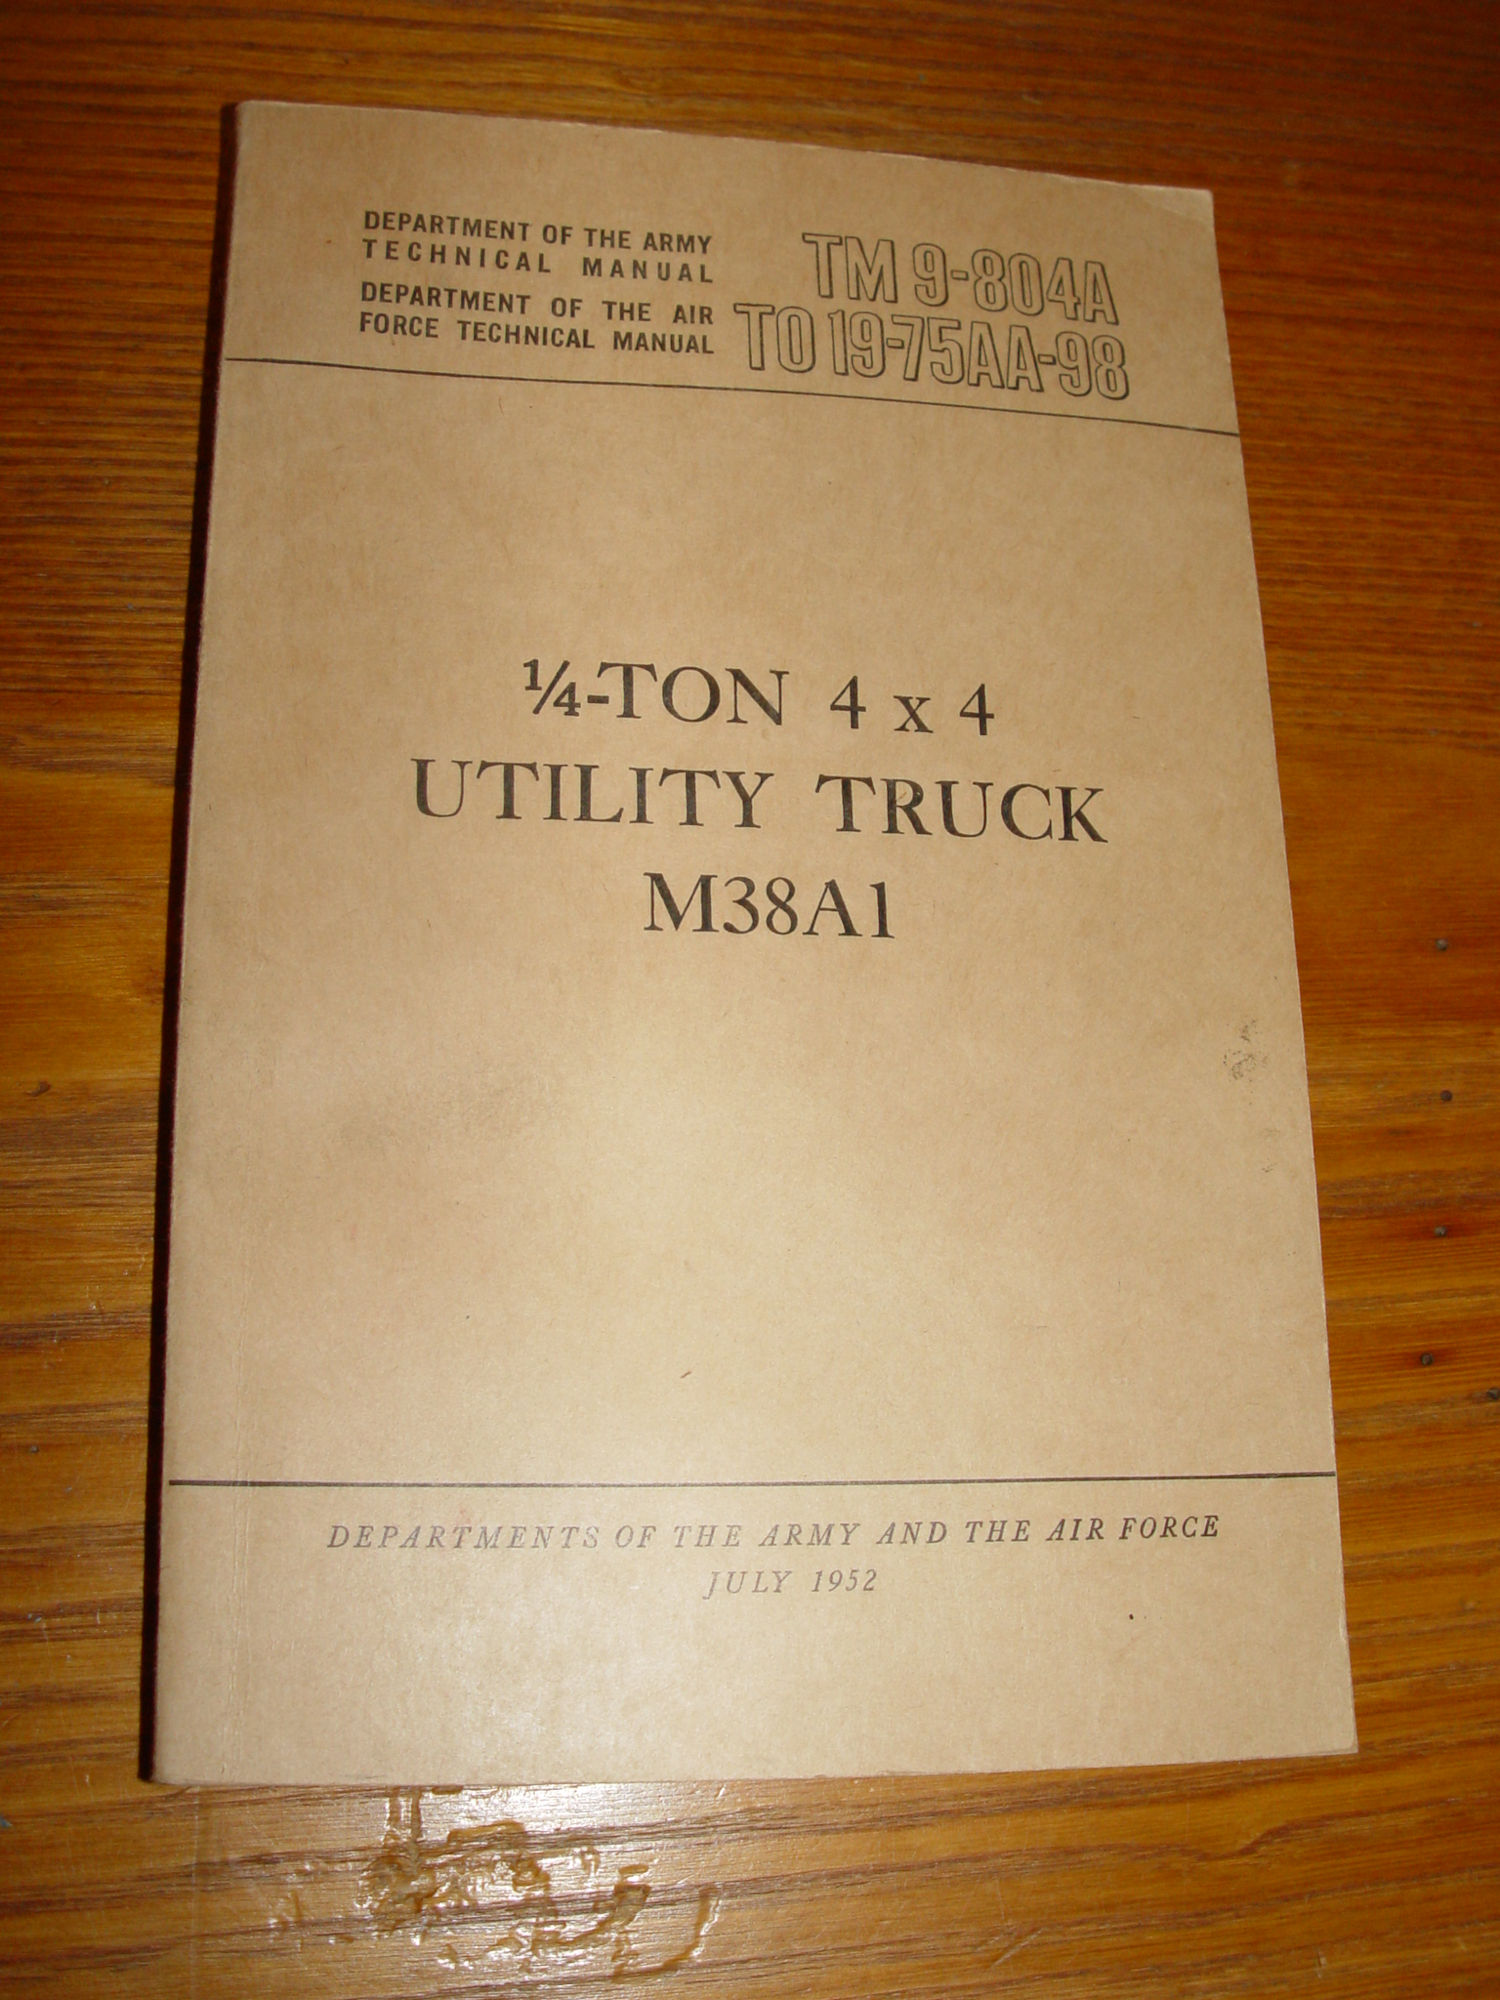 1/4 TON 4 x 4 UTILITY TRUCK M38Al -
                          Willy's Military Jeep Manual July 1952